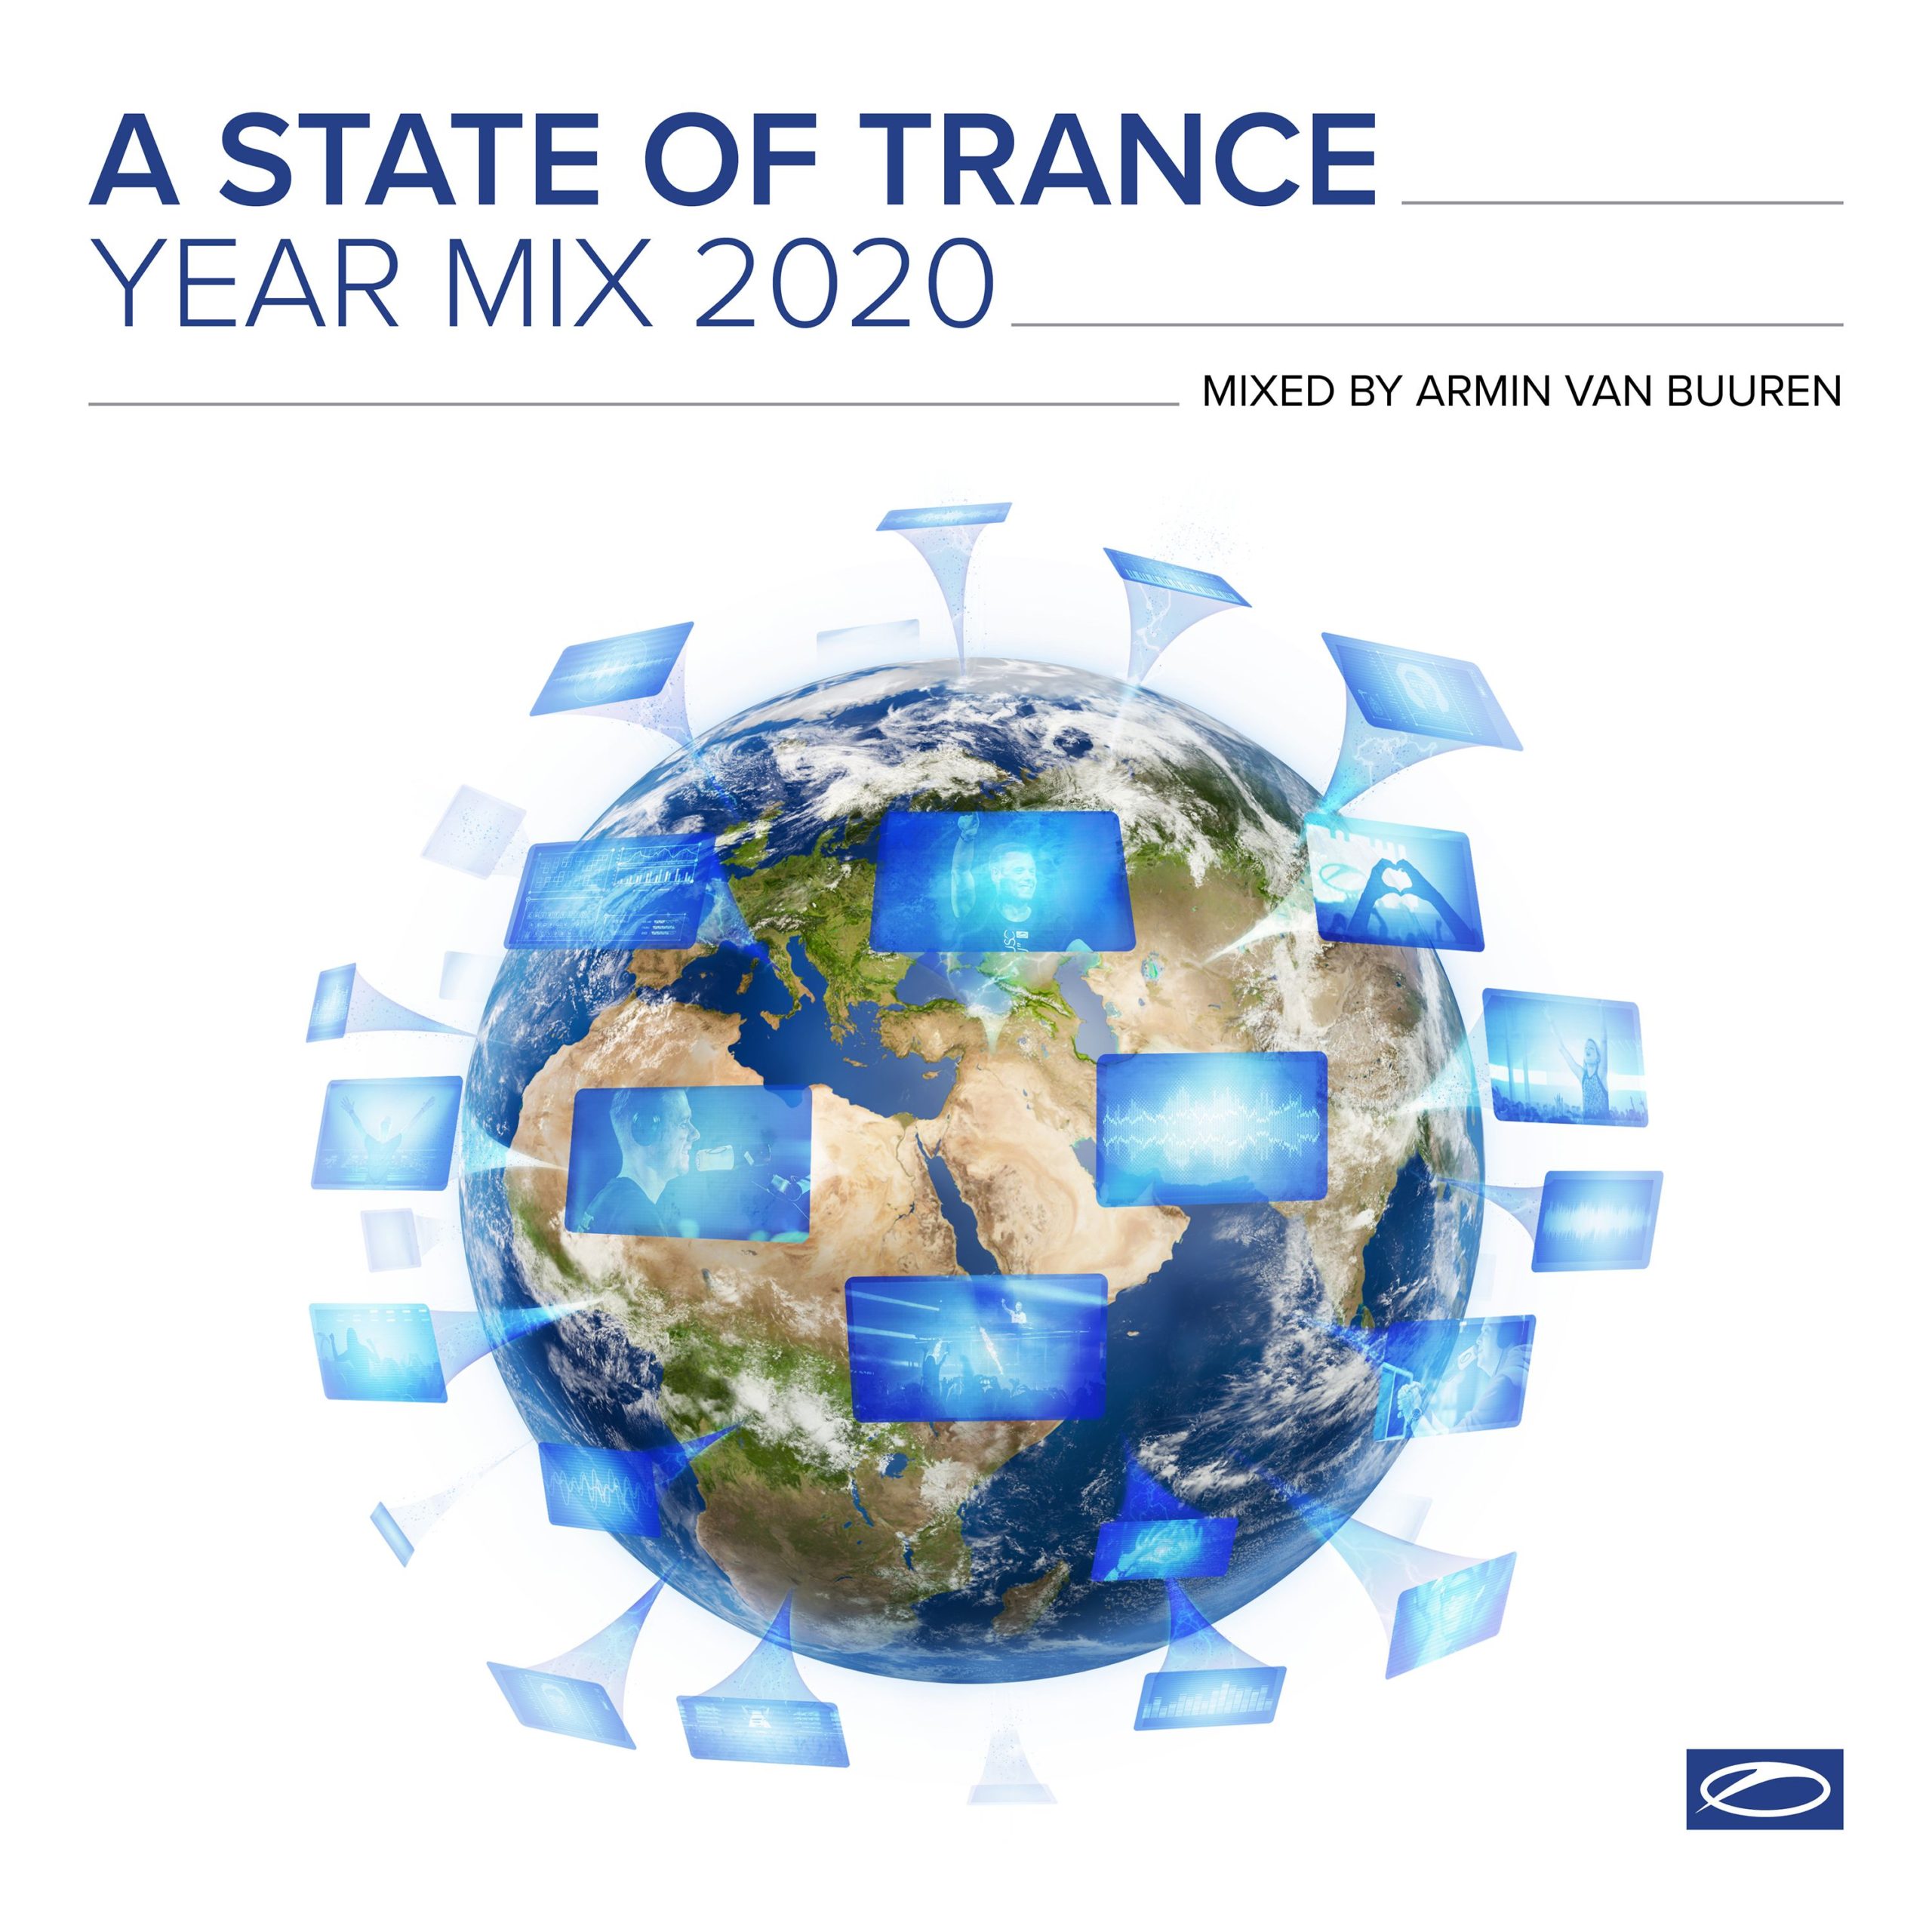 Various Artists presents A State Of Trance Year Mix 2020 mixed by Armin van Buuren on Armada Music